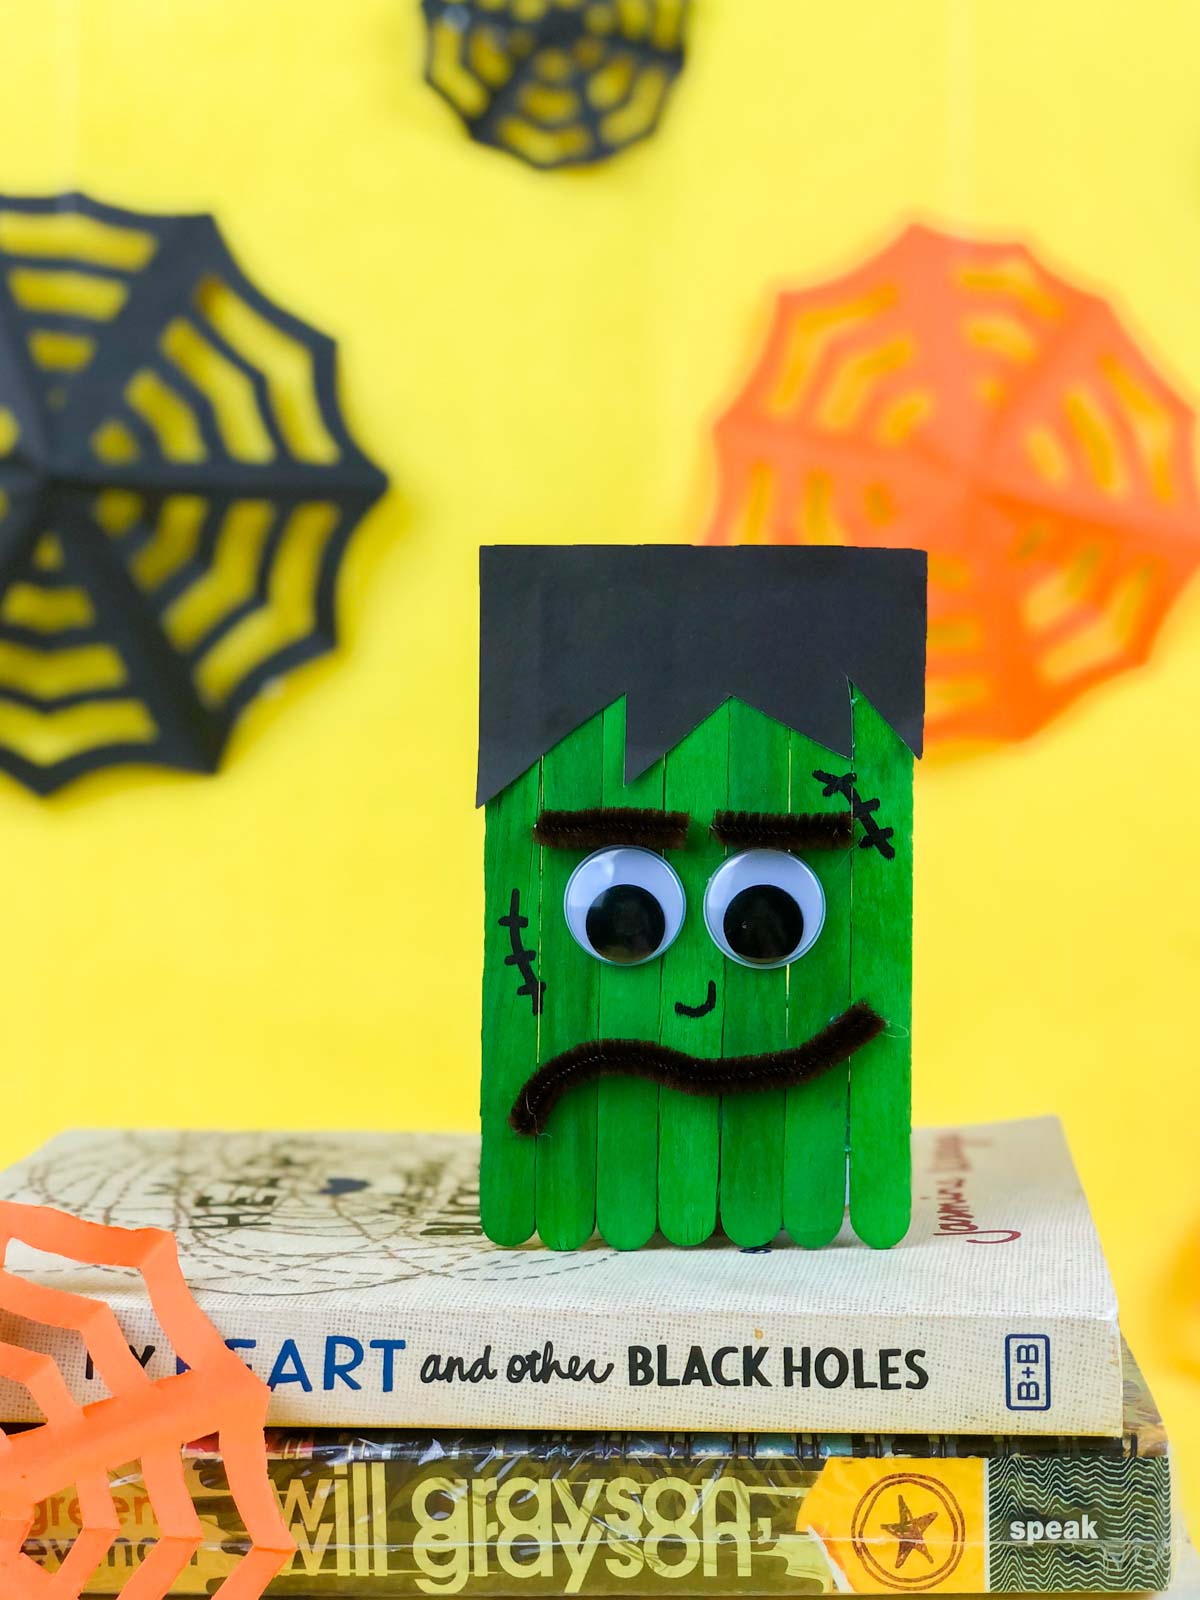 Frankenstein craft made out of popsicle sticks on a stack of books